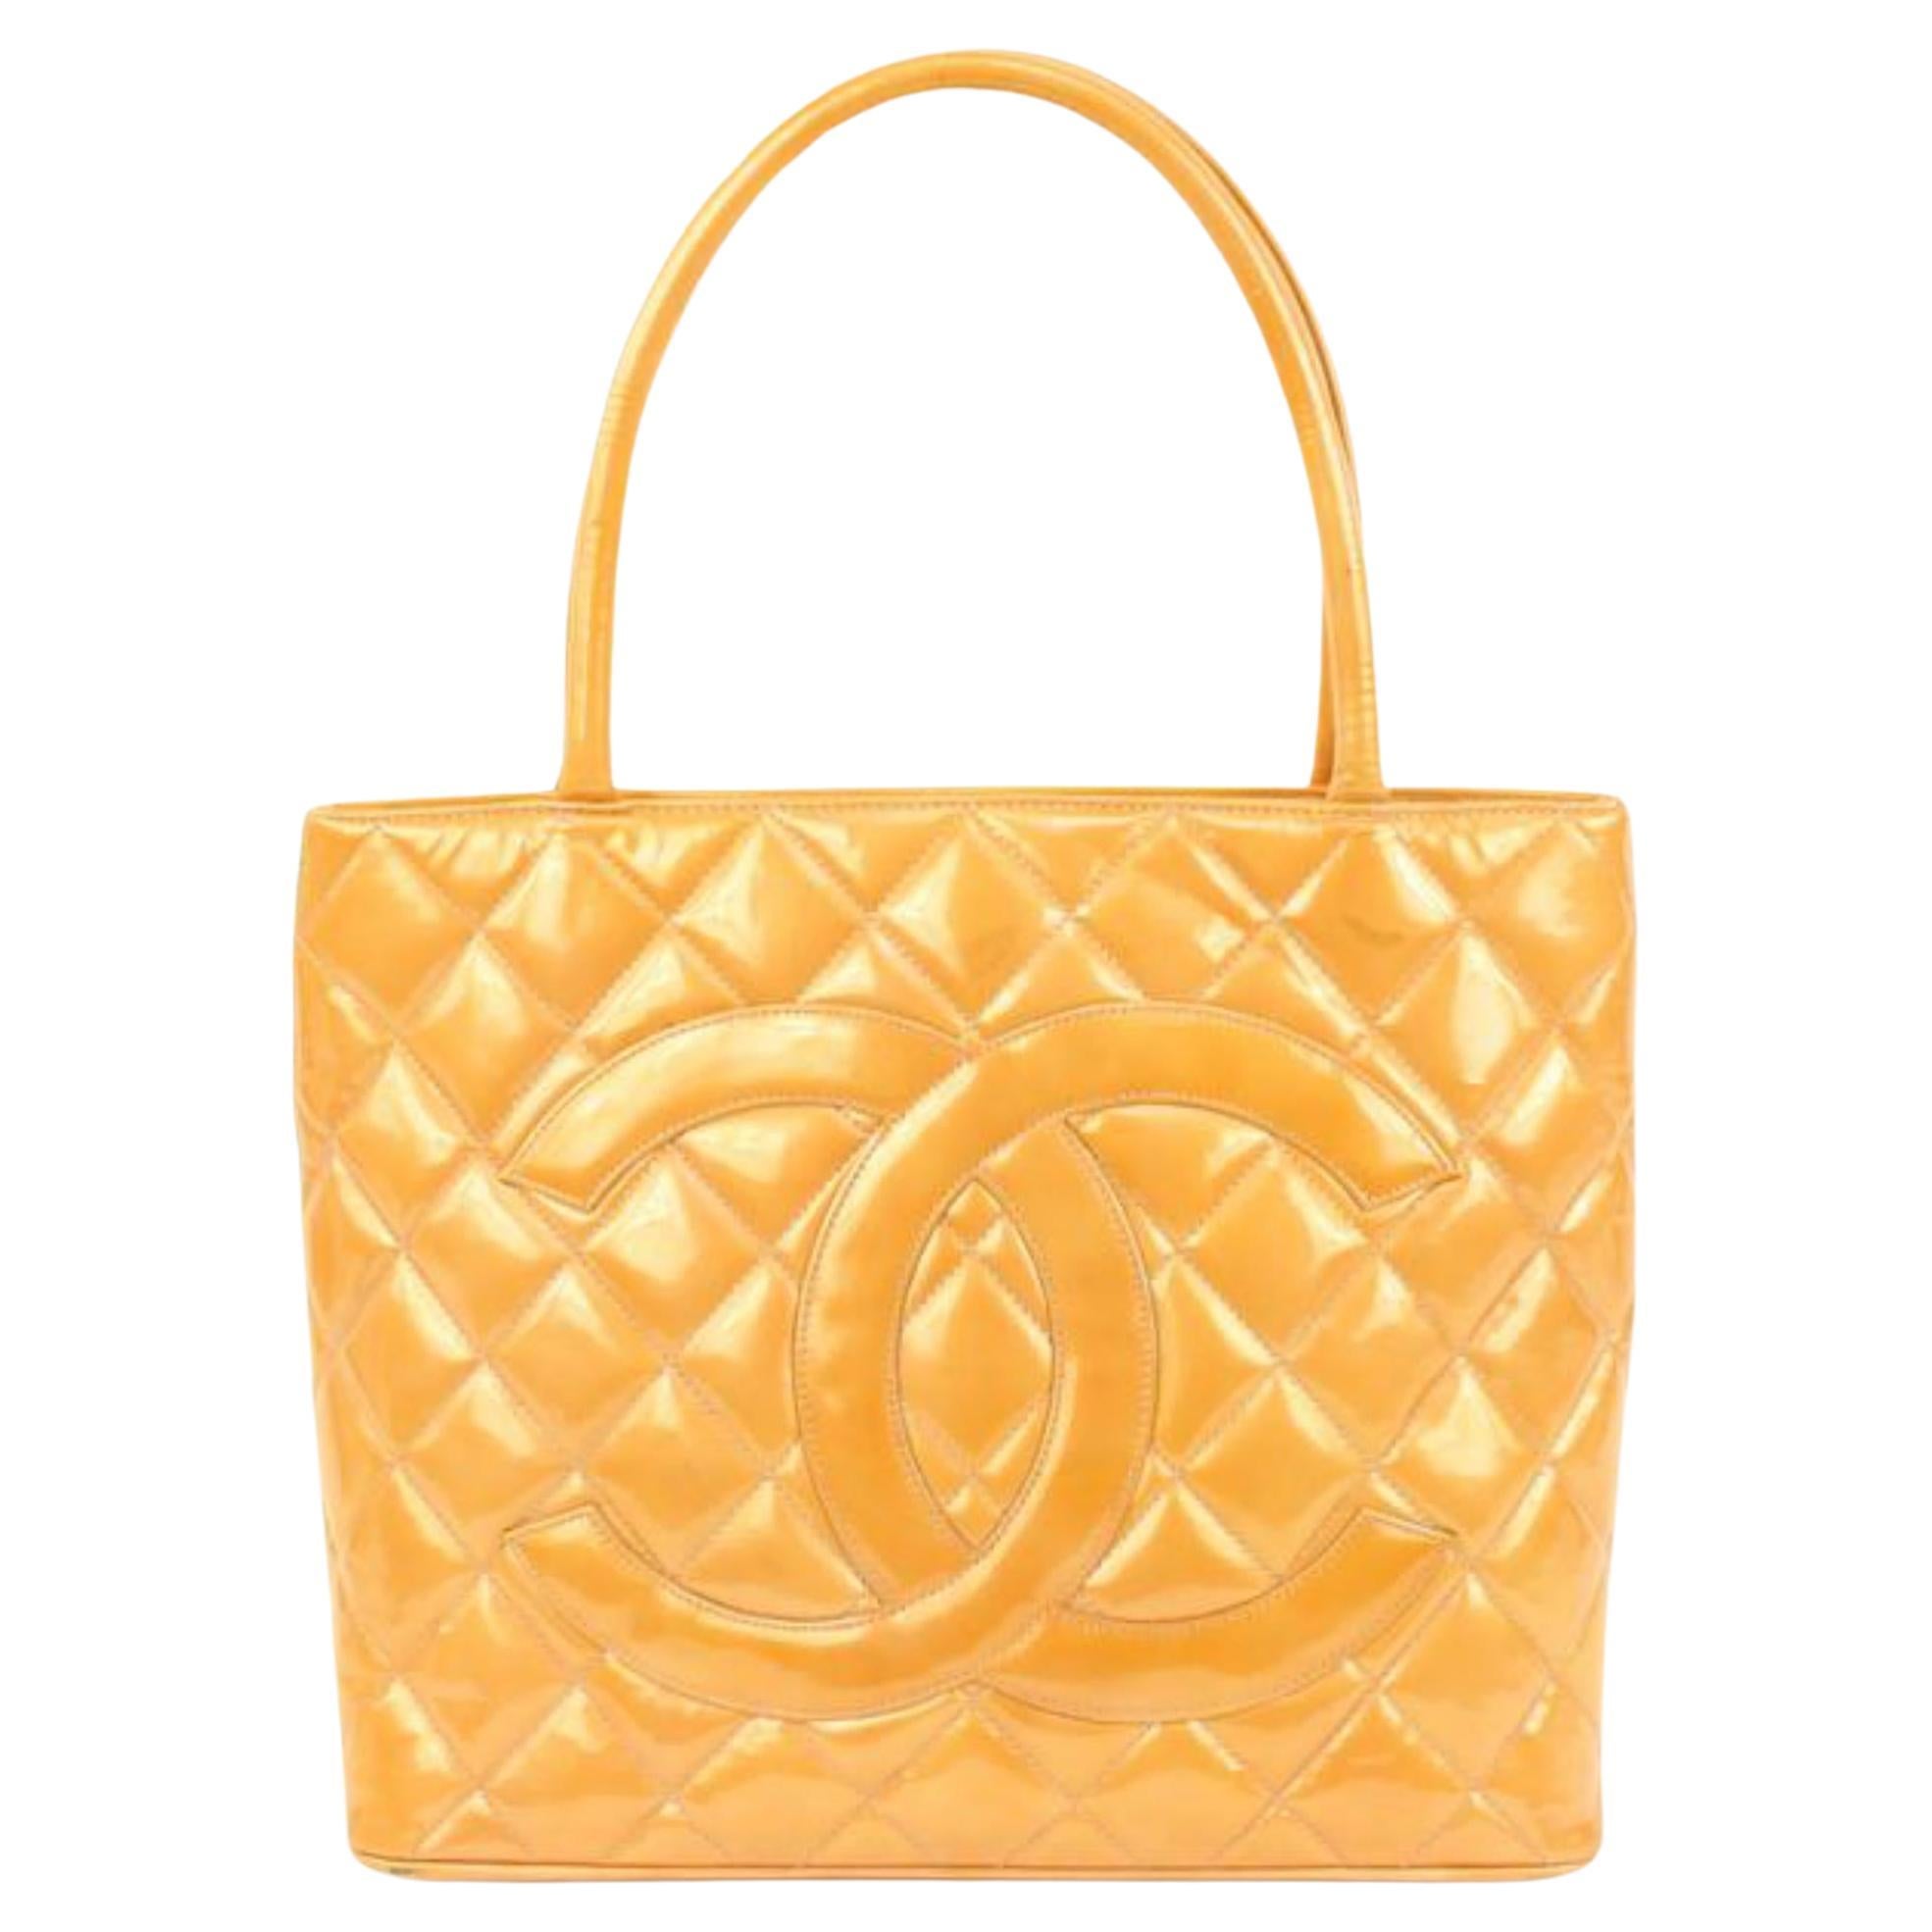 Chanel Orange Quilted Patent Leather Zip Tote Bag 83ck328s